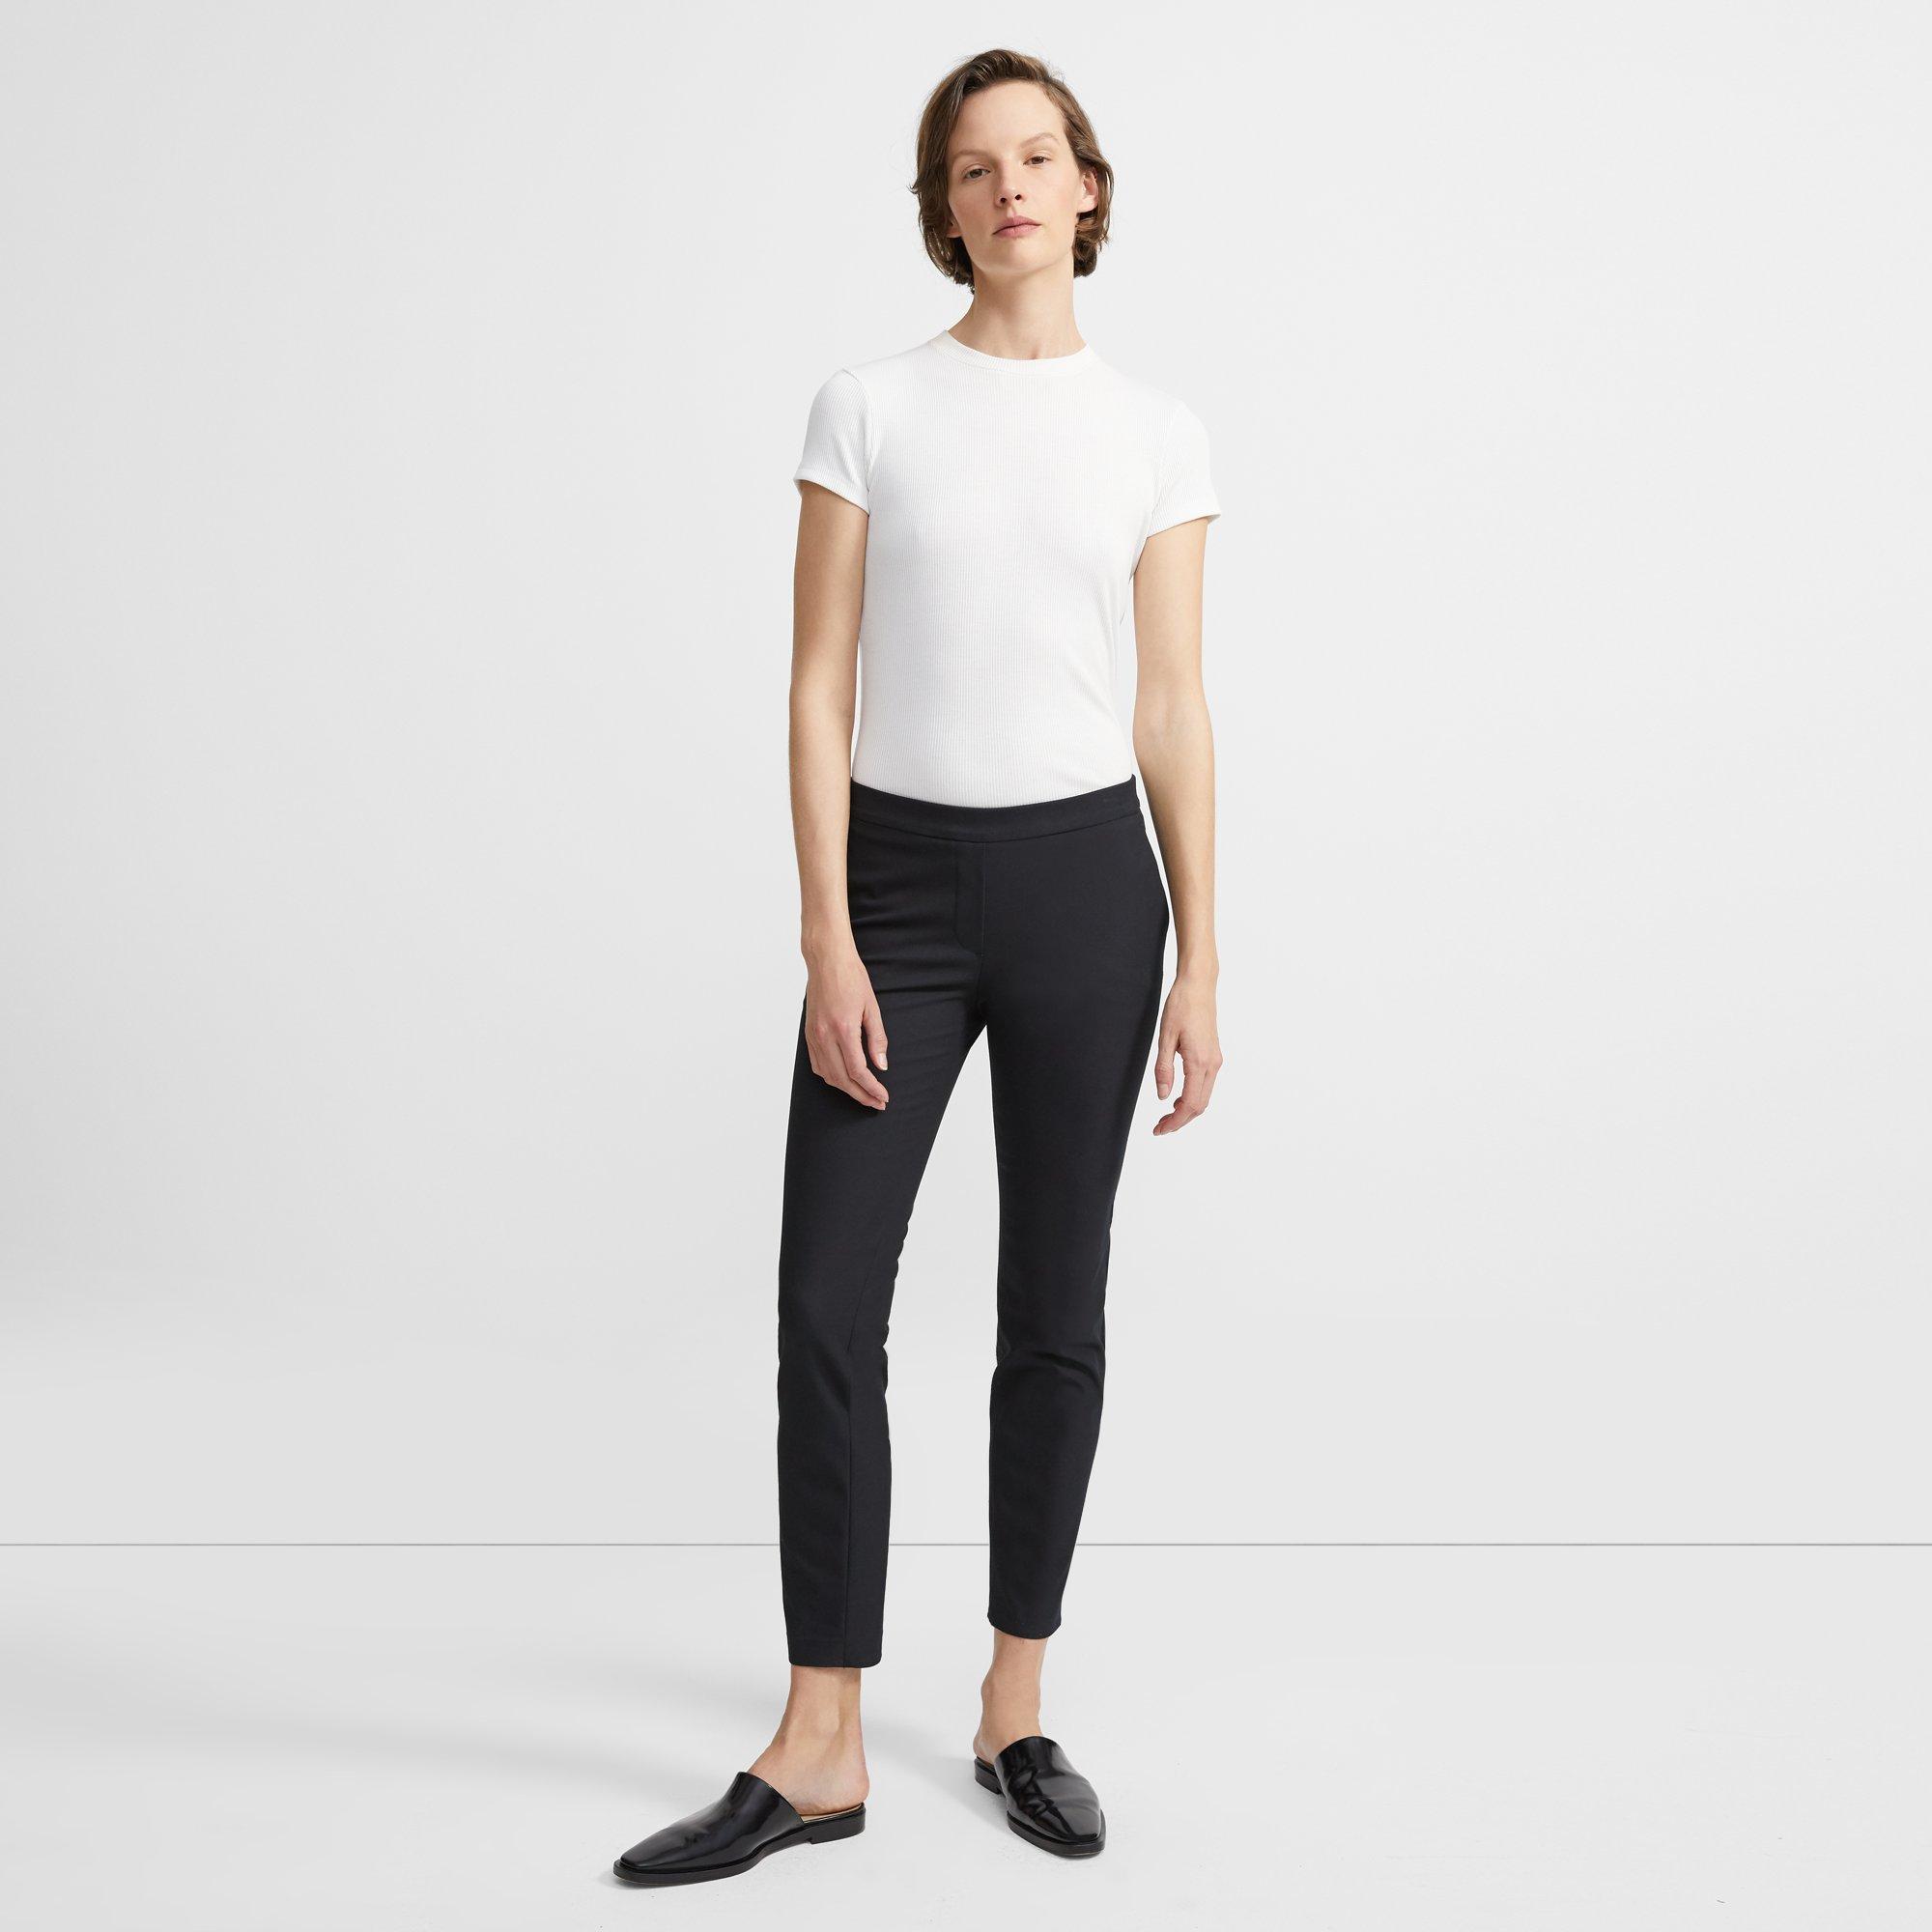 042055 PULL ON COTTON STRETCH WOMENS TROUSER